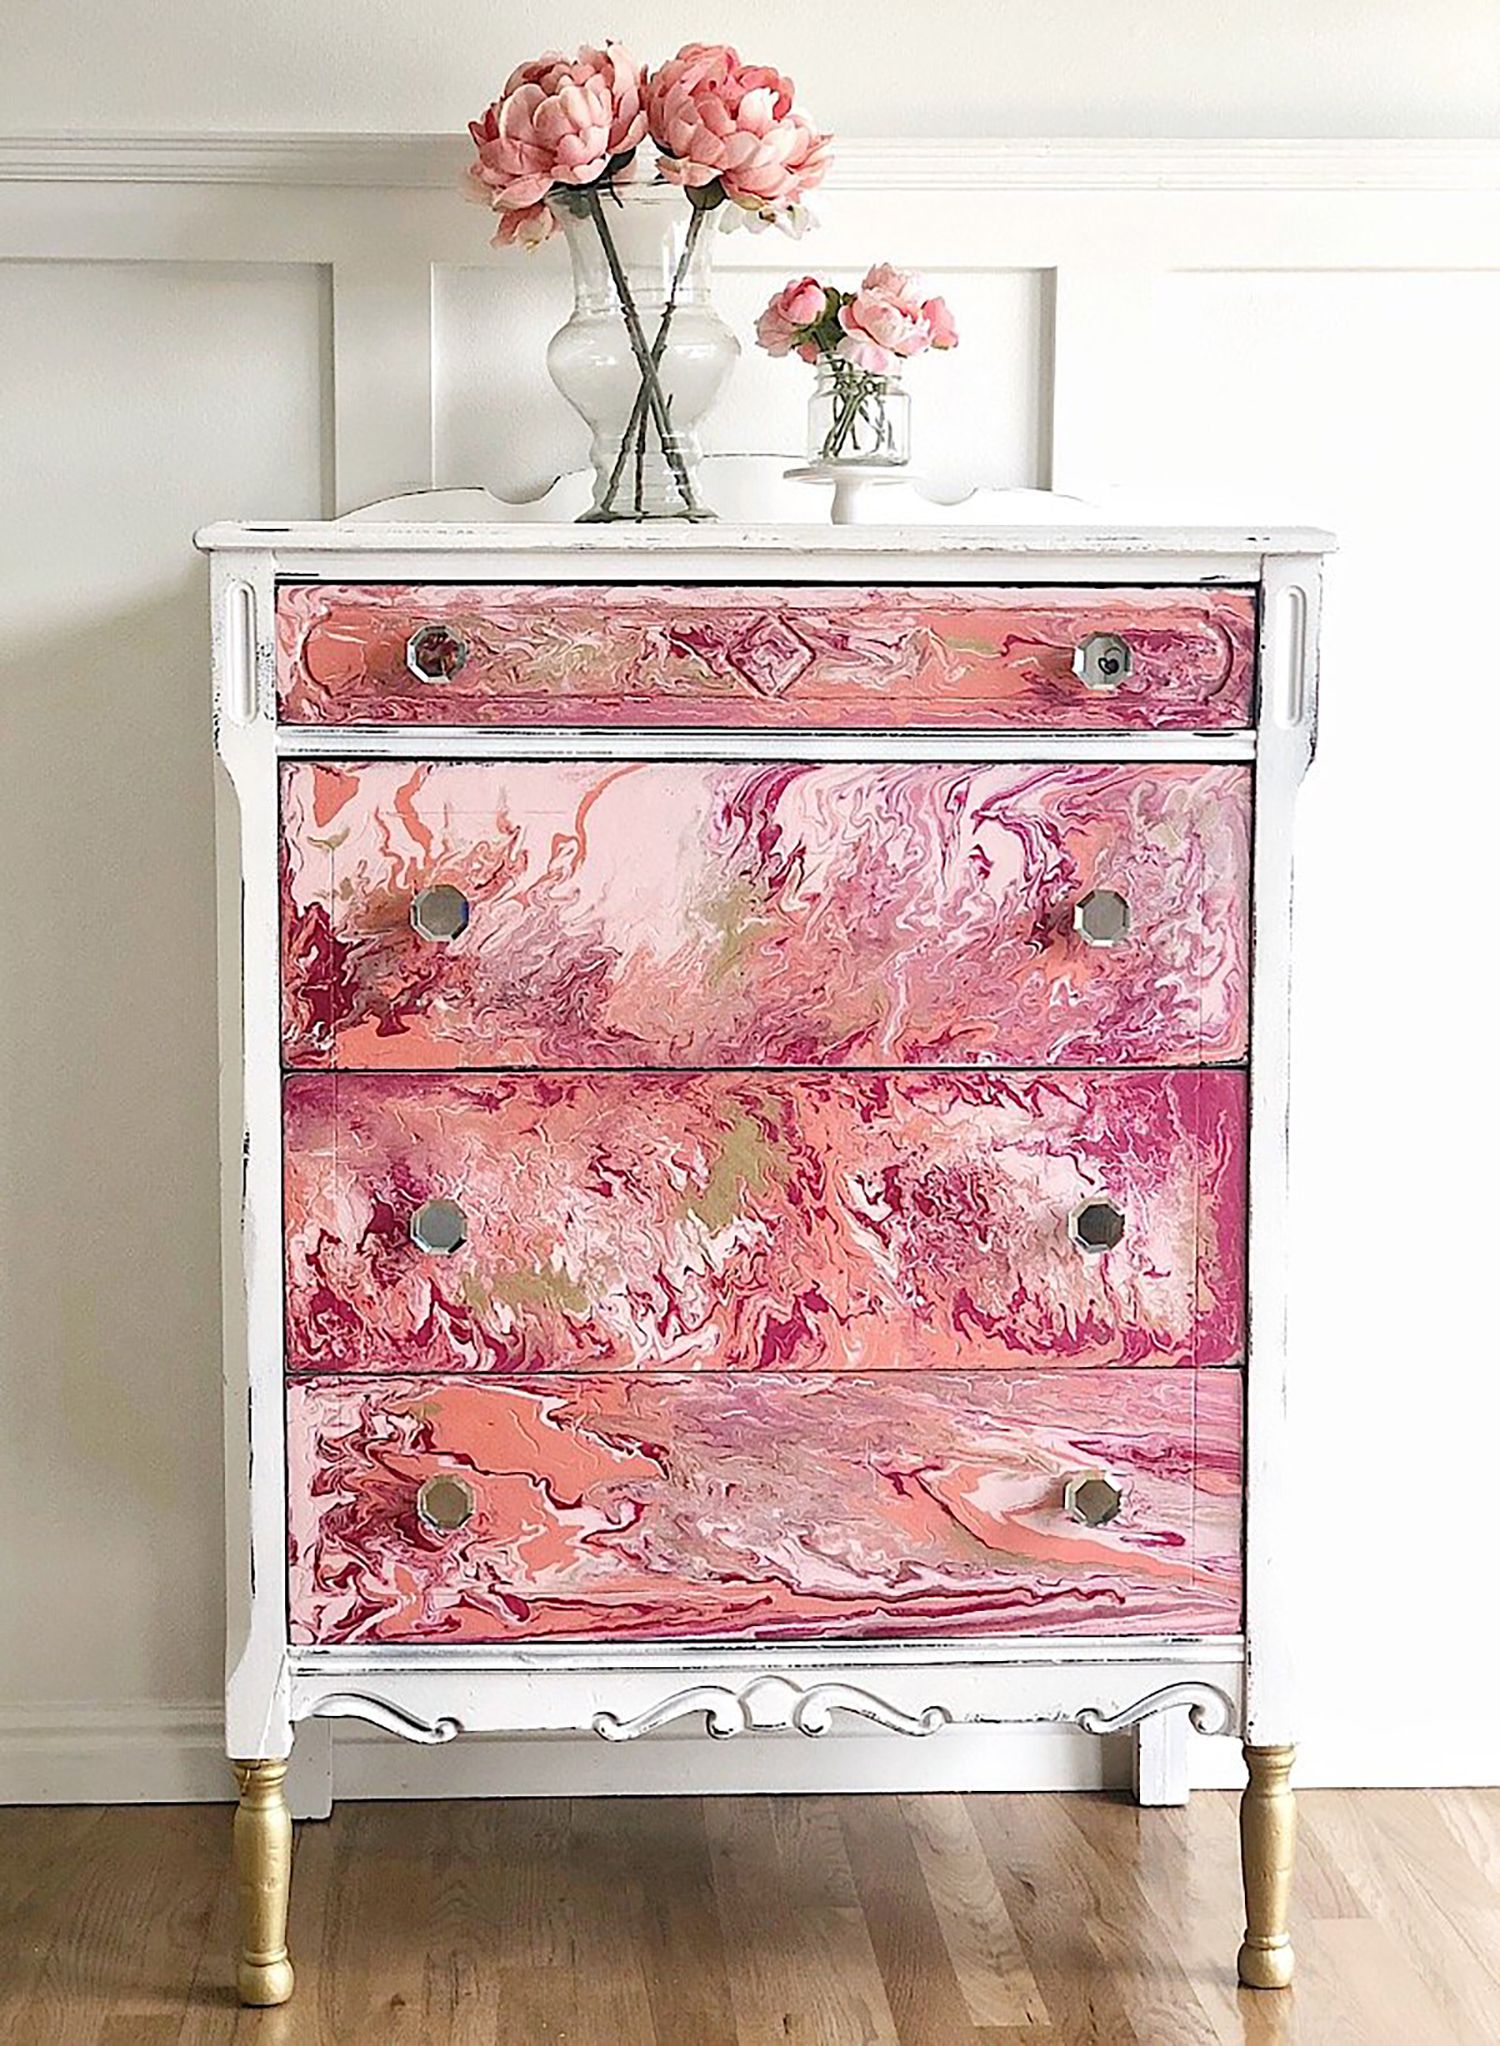 Painted Furniture Ideas  Best Paints for a Metallic Finish - Painted  Furniture Ideas